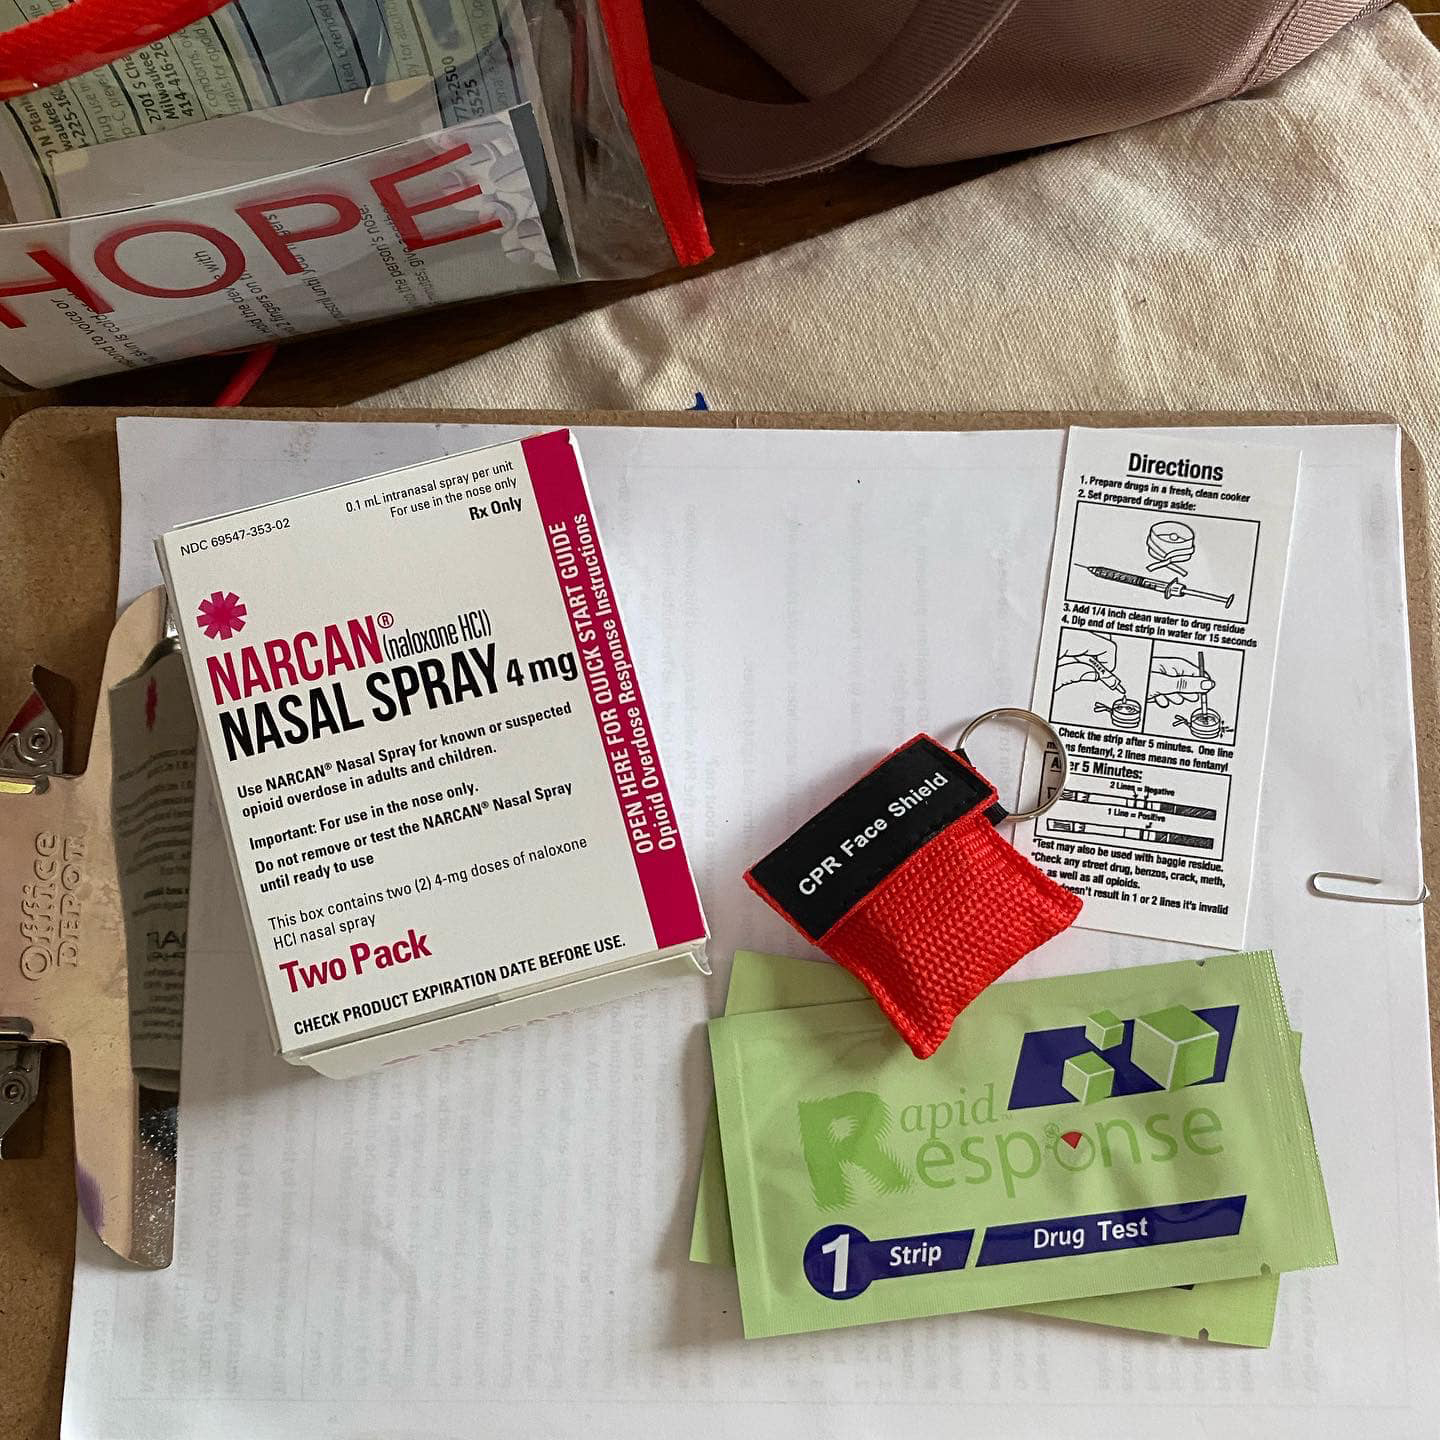 A box of Narcan nasal spray, two Rapid Response drug tests, a CPR face shield and instruction manual sit on a clipboard with a piece of paper, next to a transparent plastic pouch with the word "HOPE" on its side.